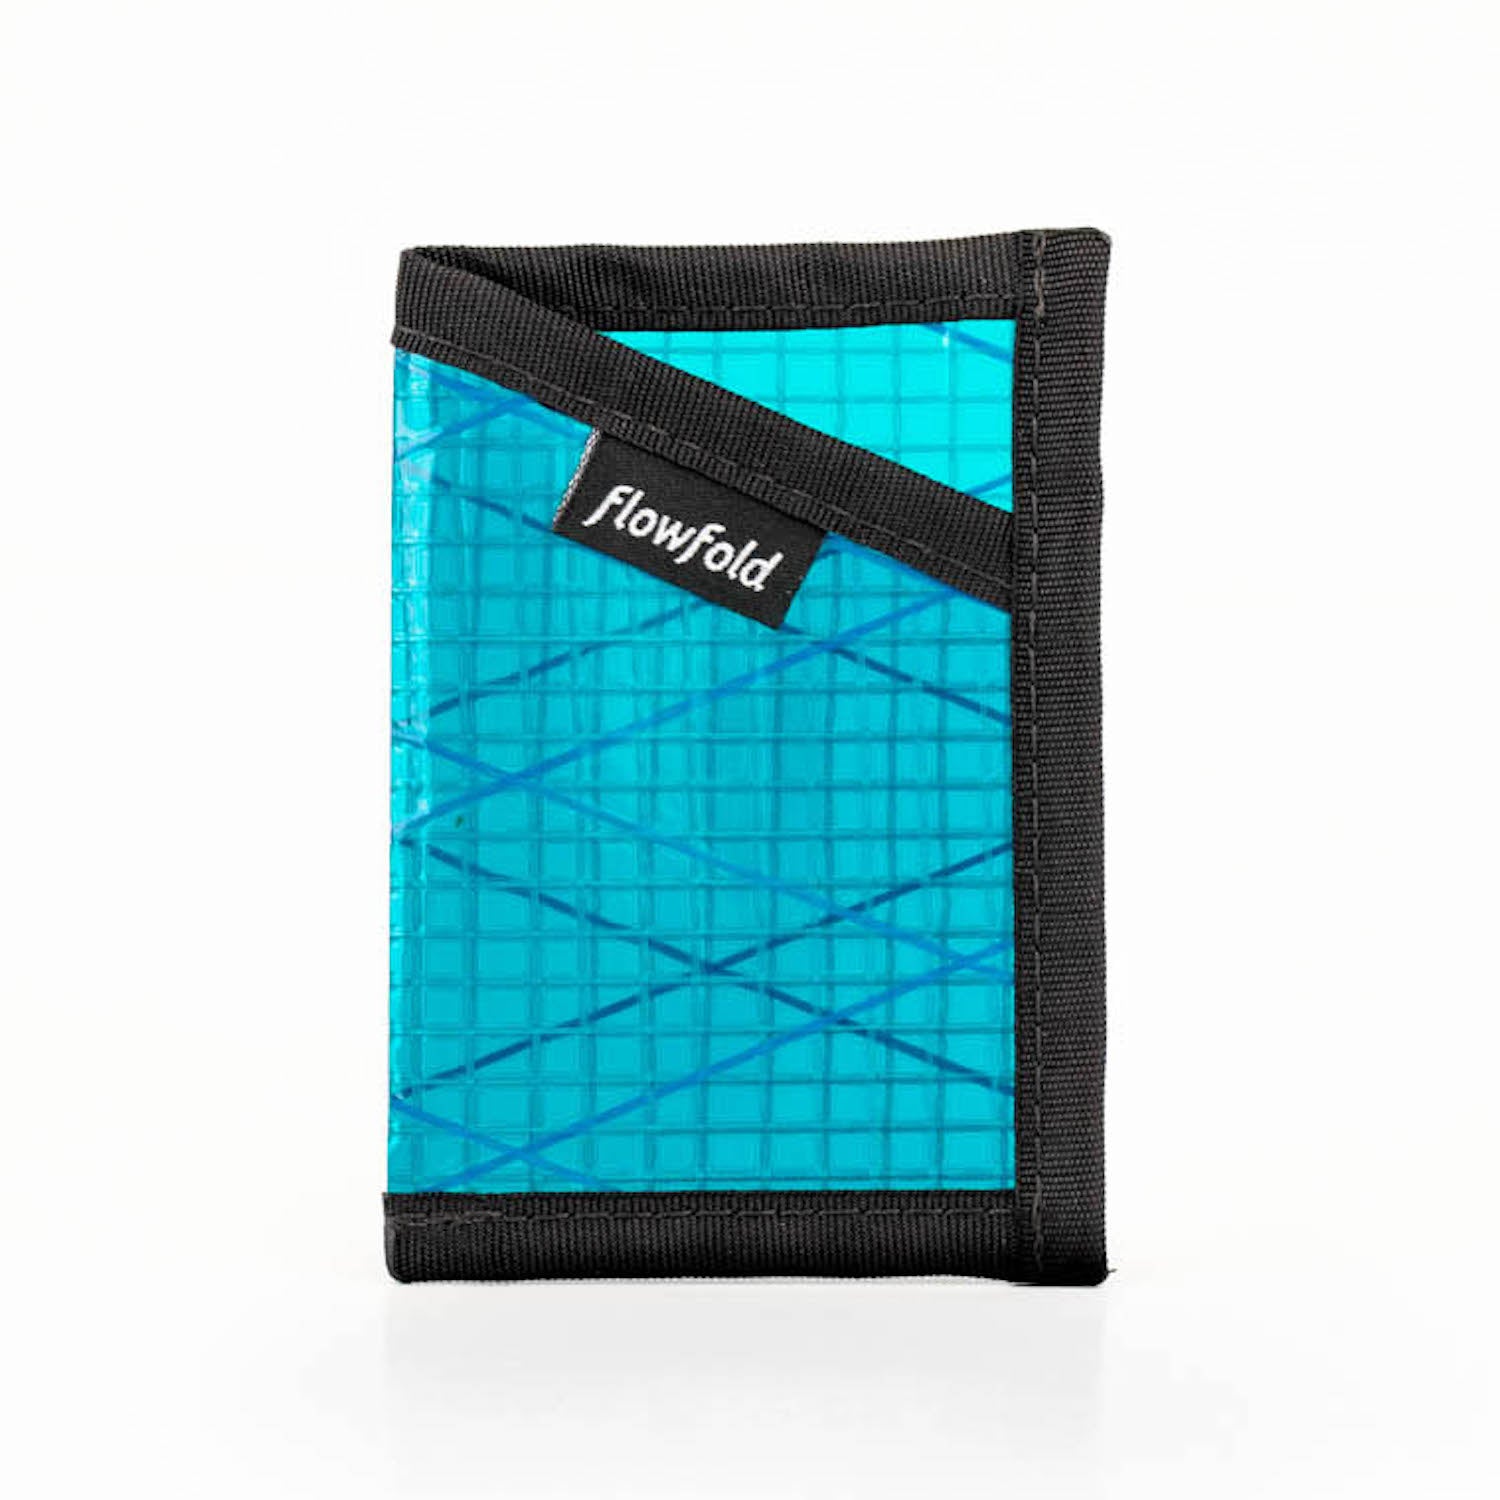 Flowfold Cyan Recycled Sailcloth Minimalist Card Holder Wallet Made in USA, Maine by Flowfold Turquoise Sailcloth